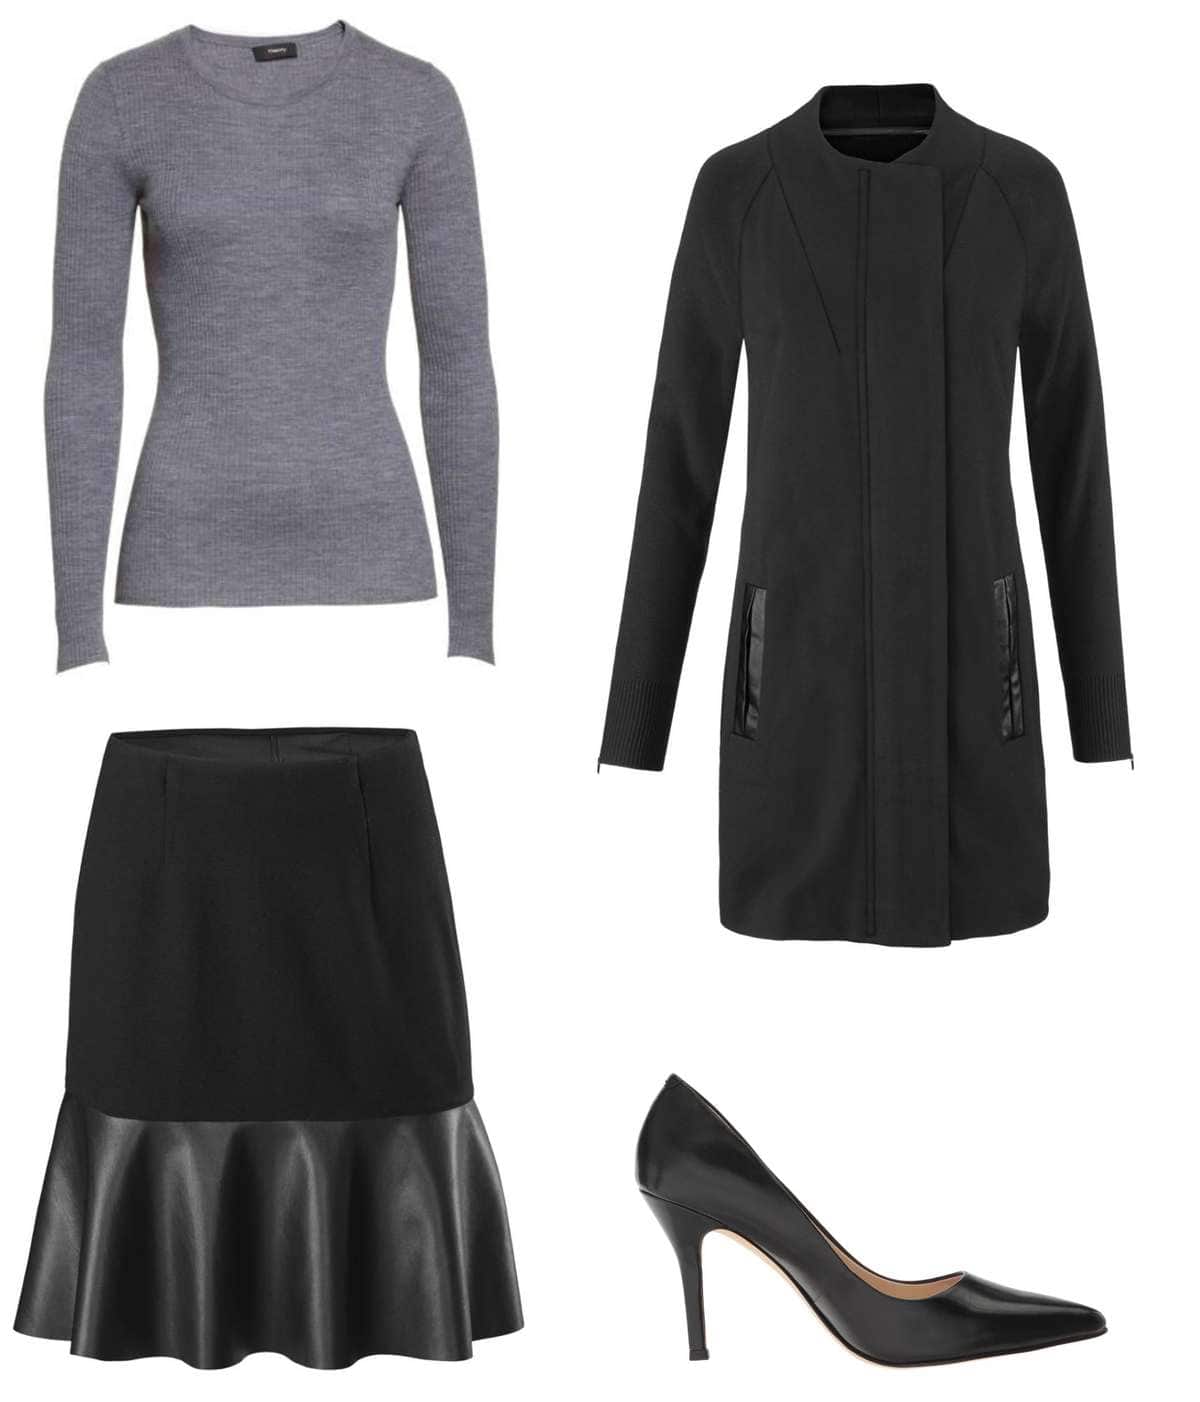 the cabi Tailor Coat and Flip Skirt styled for work with a grey merino crewneck and black pumps